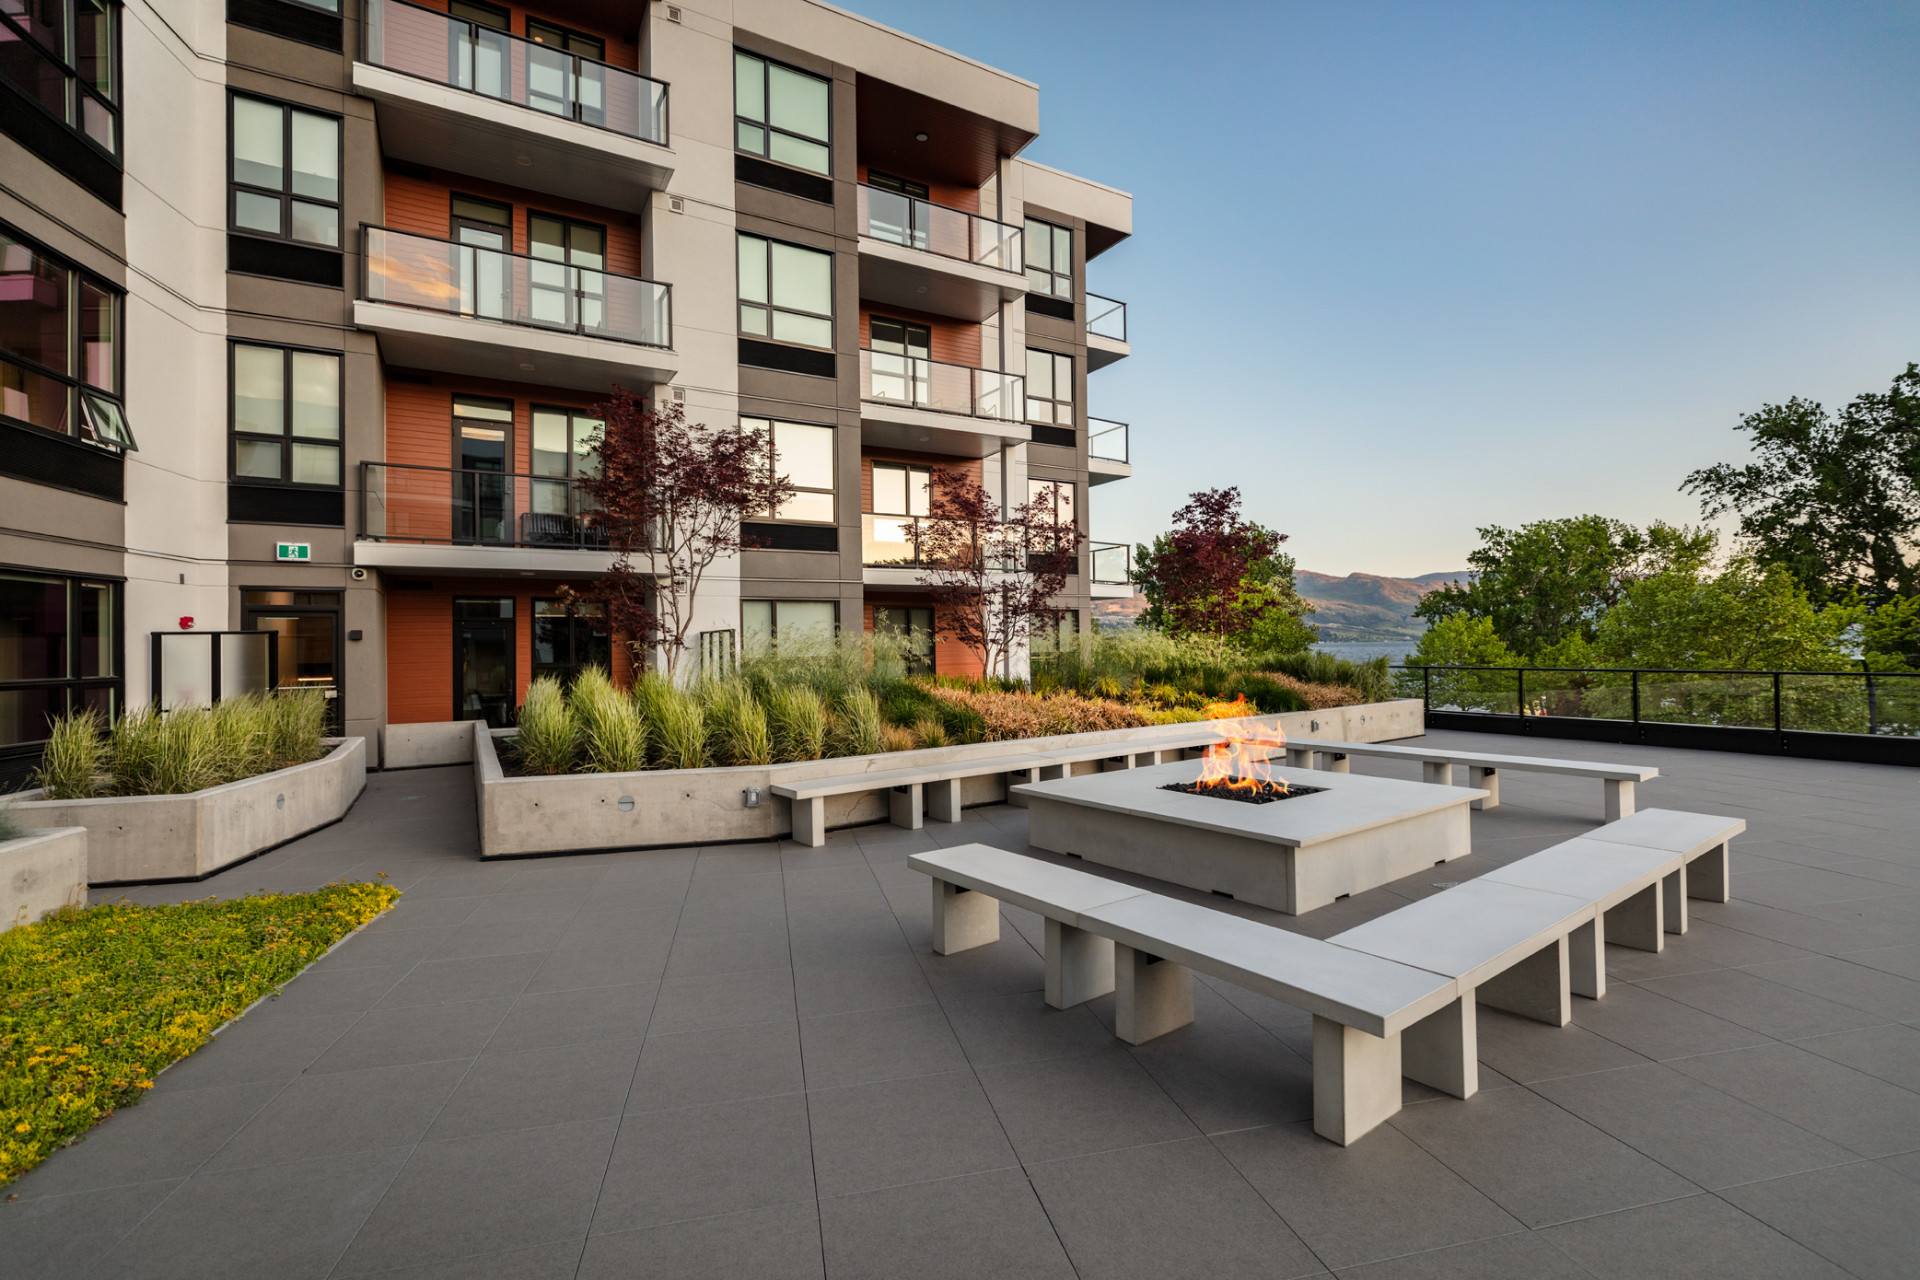 Outdoor Terrace at The Shore Hotel in Kelowna showing a fire pit with lit fire and seating around it